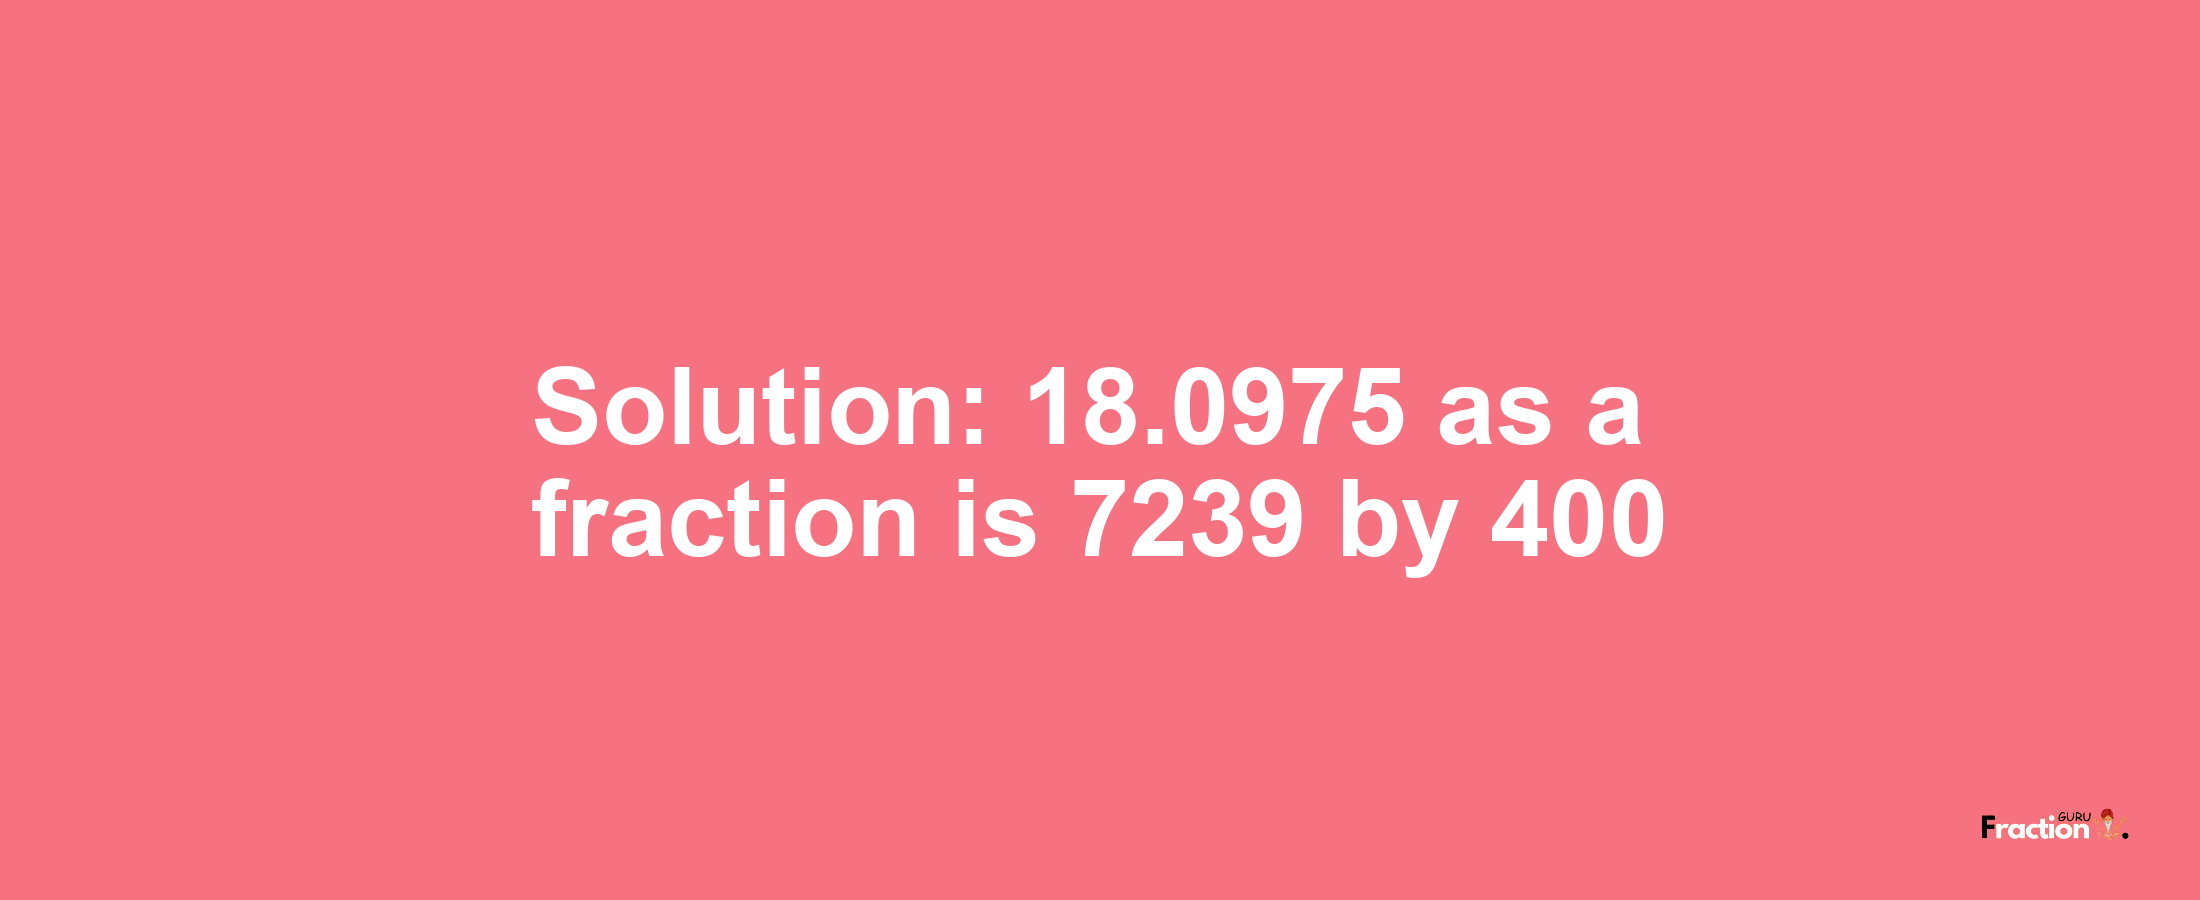 Solution:18.0975 as a fraction is 7239/400